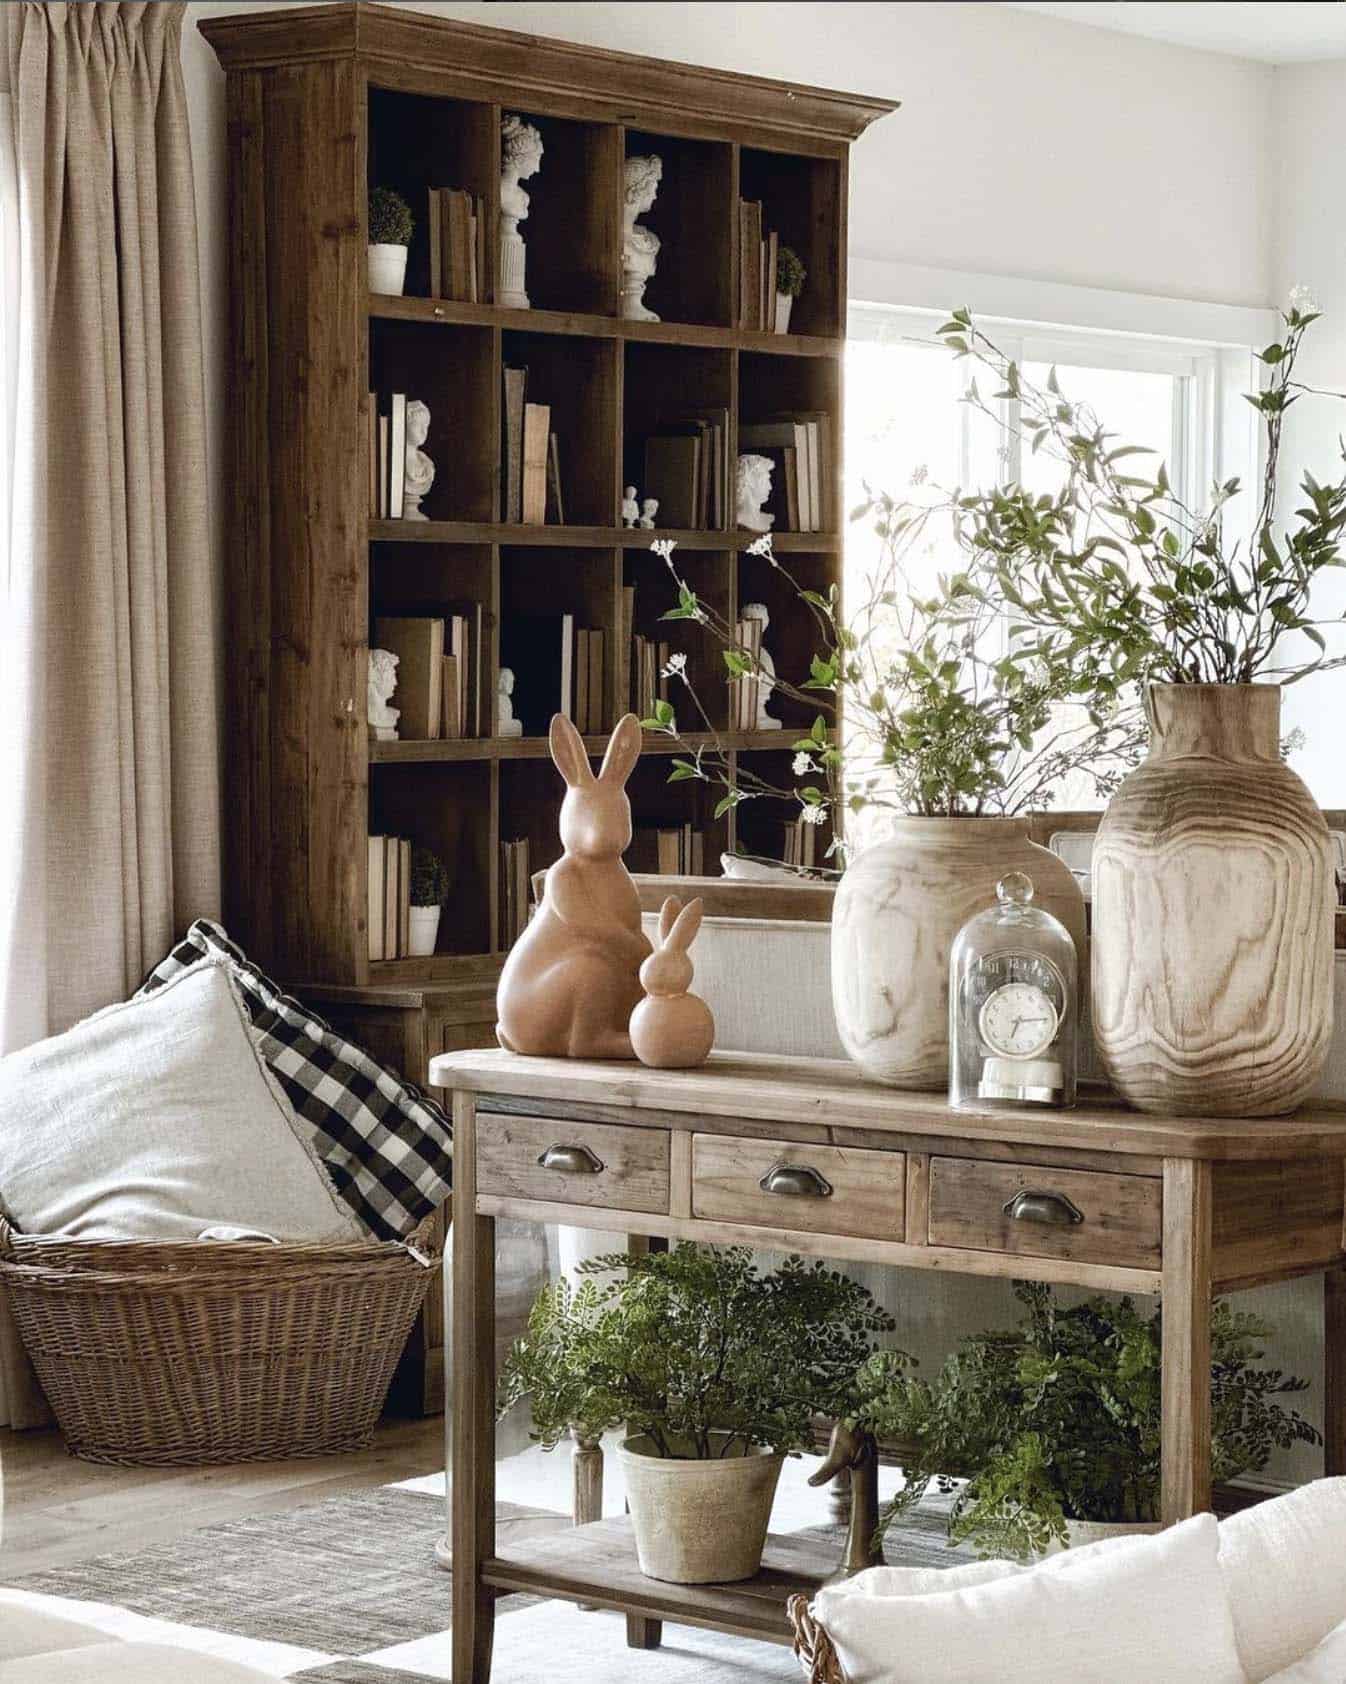 living room decorated for spring with whites, woods and greenery